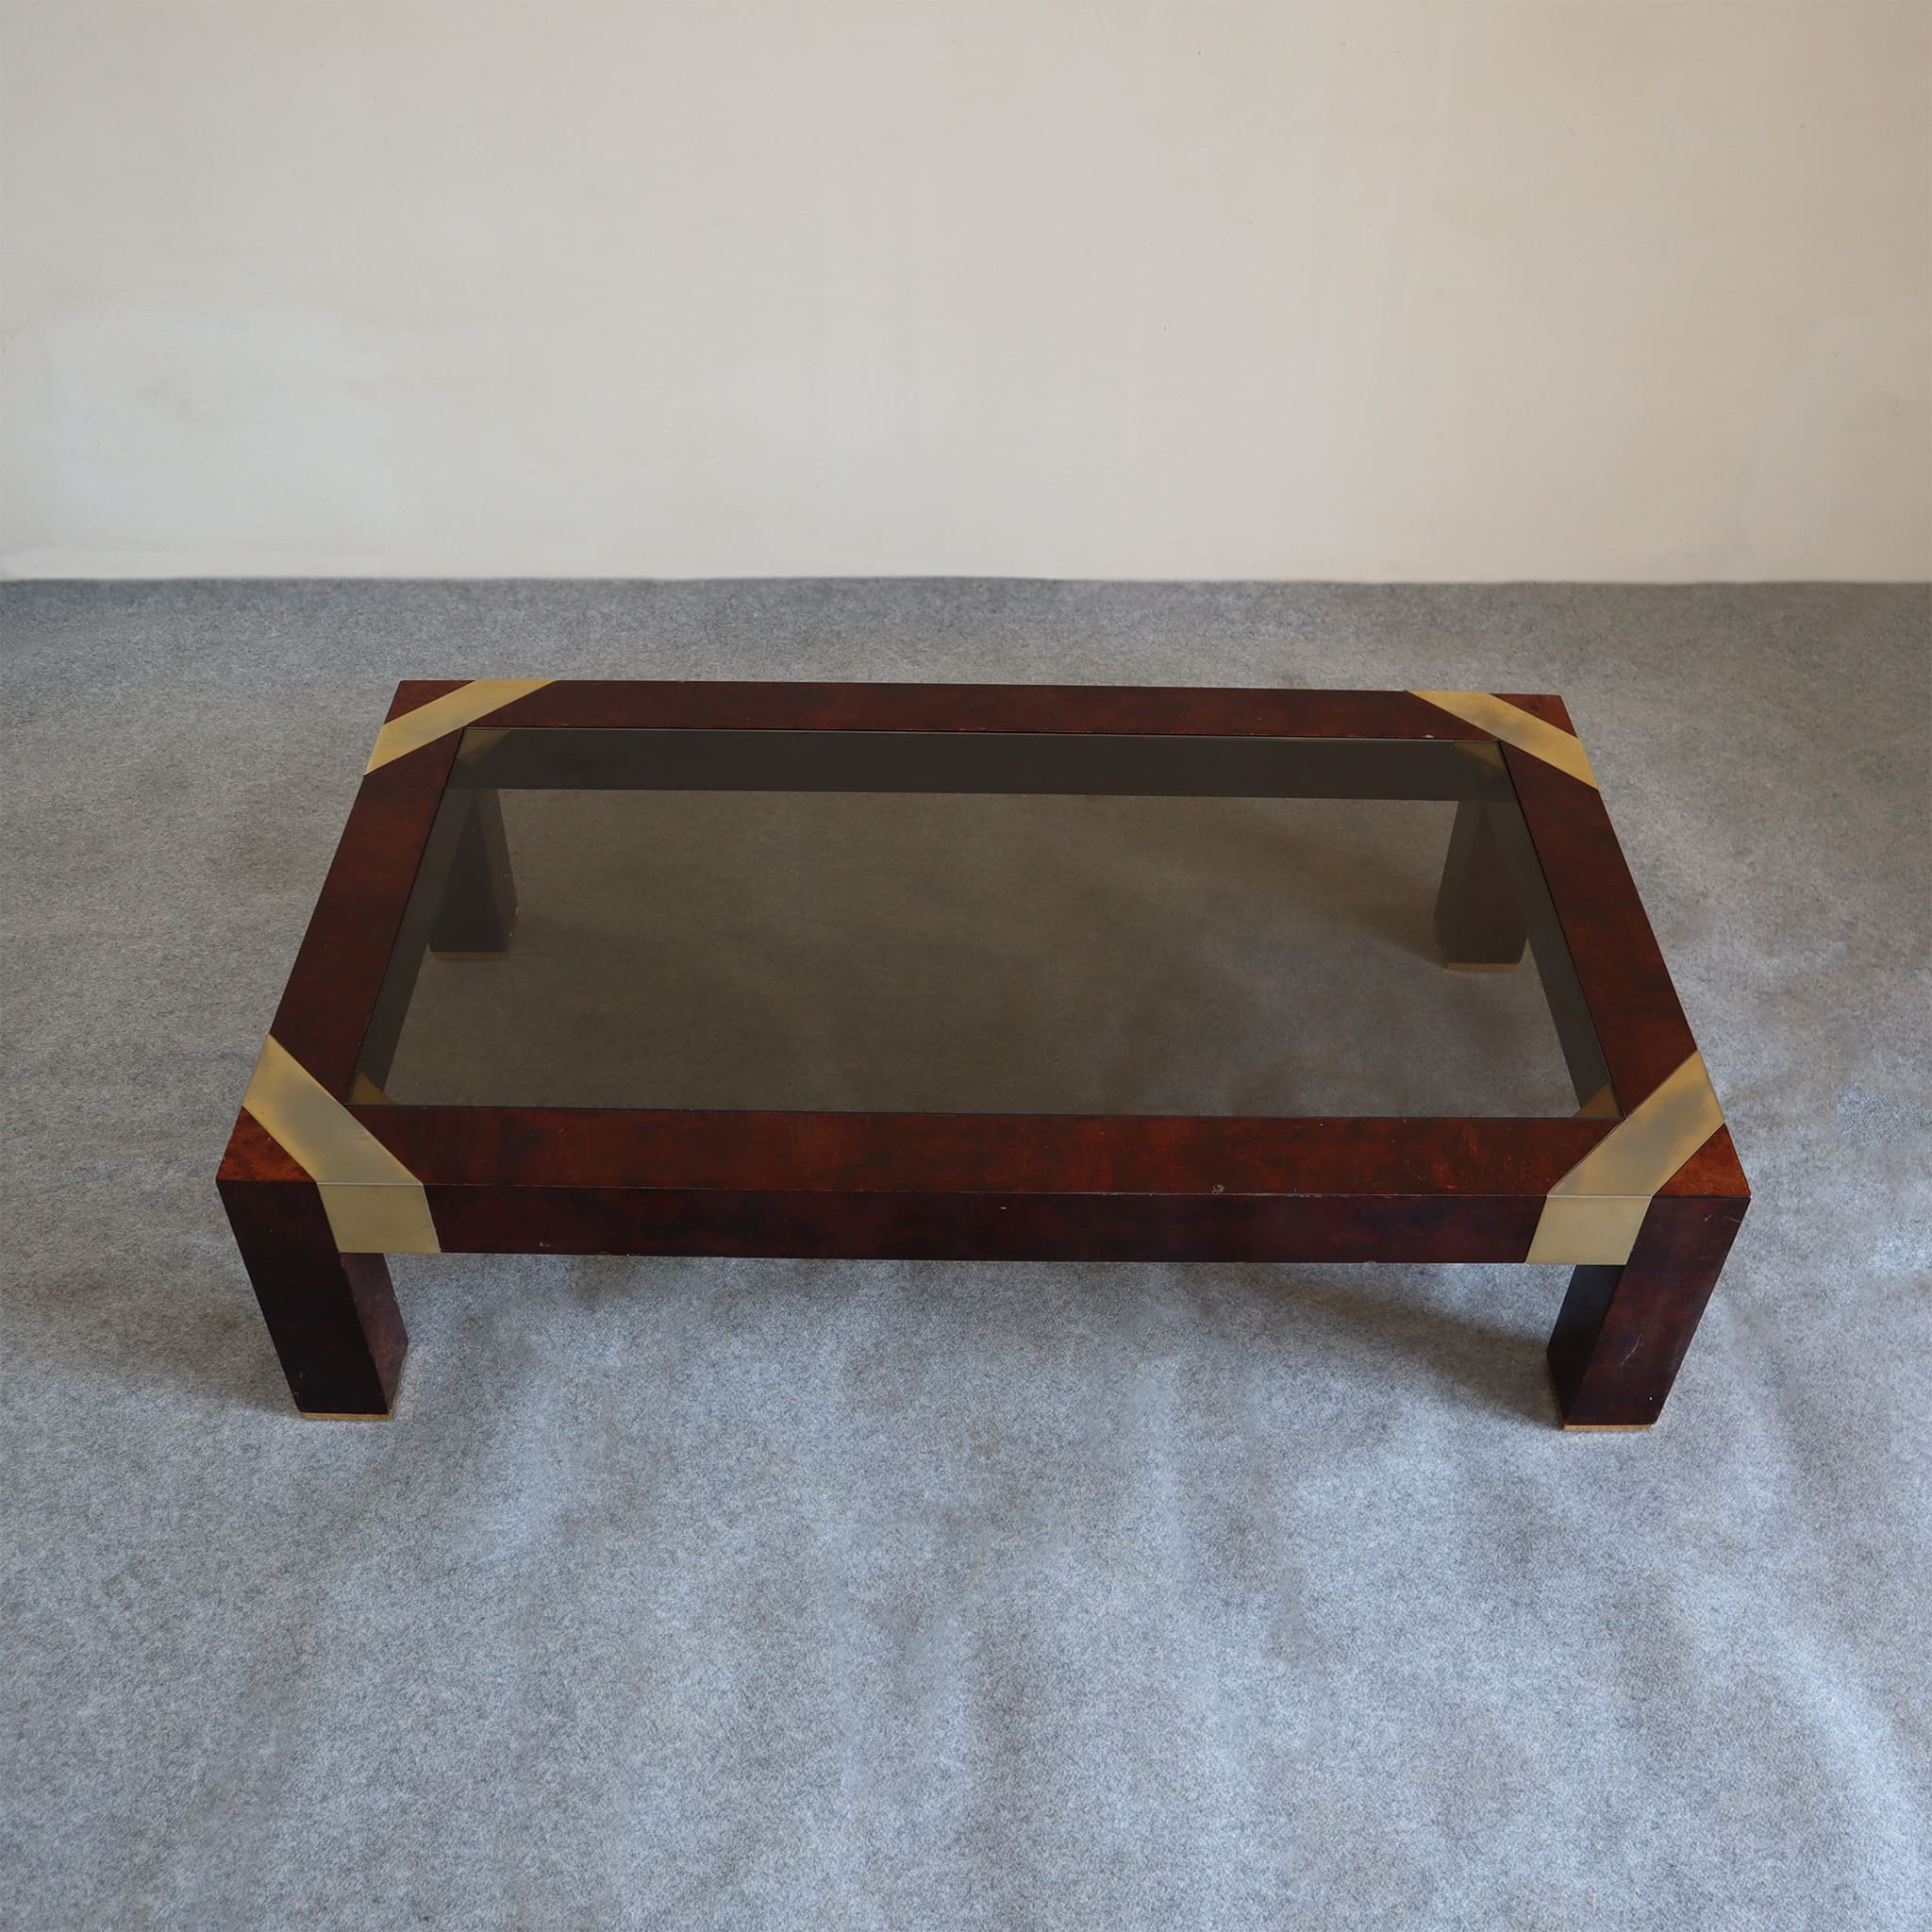 visionidepoca-modern-art-coffee-table-in-briar-and-brass-by-Jean-Claude-Mahey-made-in-france-1970s-smoked-glass-top-view